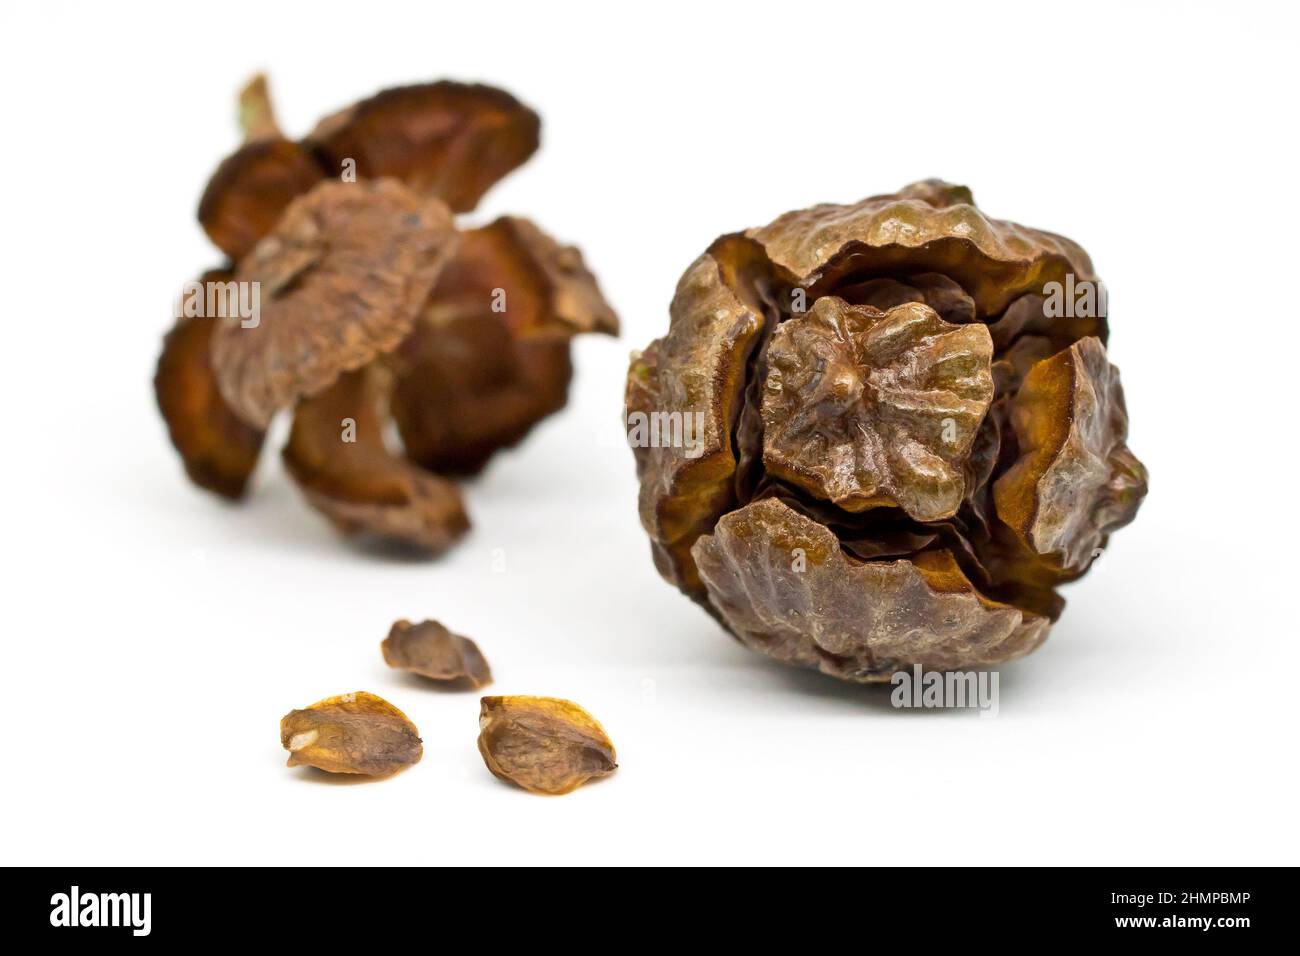 Leyland Cypress (cupressocyparis leylandii), close up still life of two mature globular cones with seeds isolated against a white background. Stock Photo